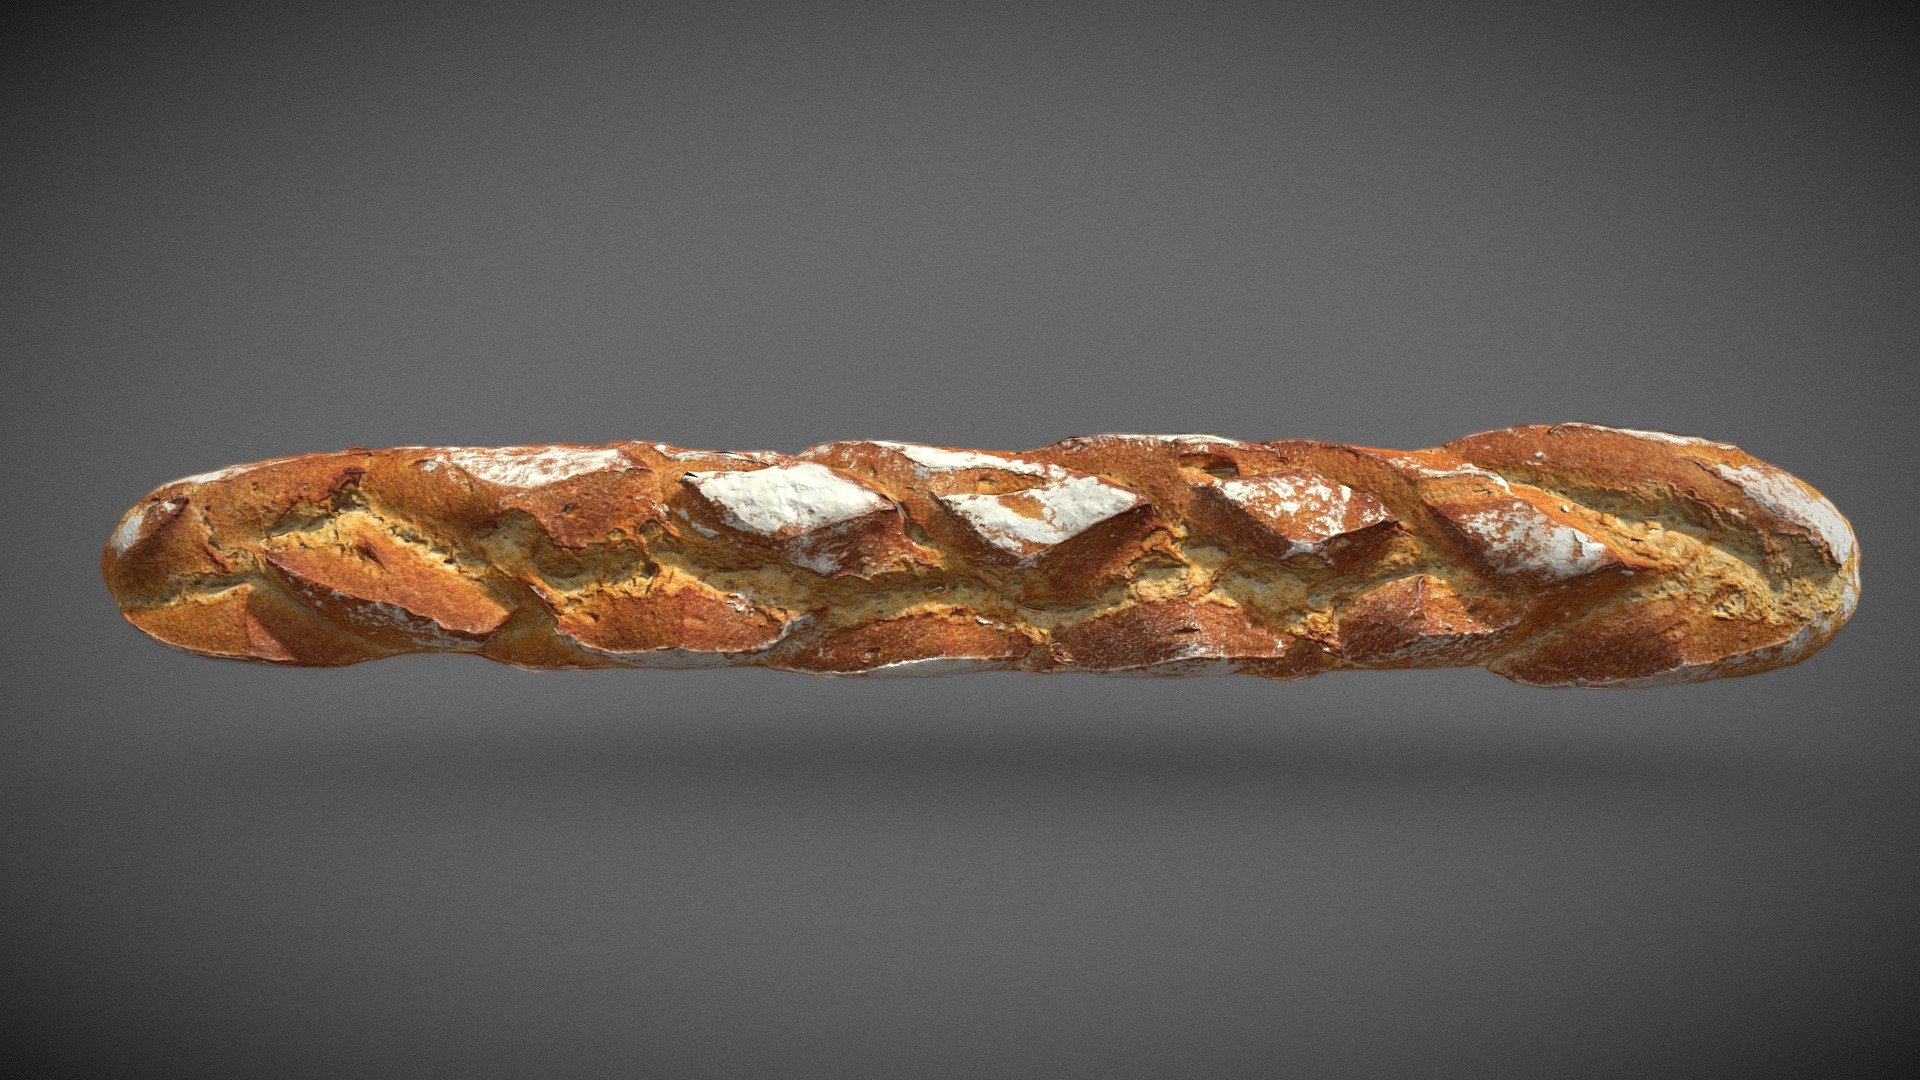 Photogrammetry scan of a french baguette.
120 pictures retopo in a 16k quad model with PBR textures in 4K 3d model